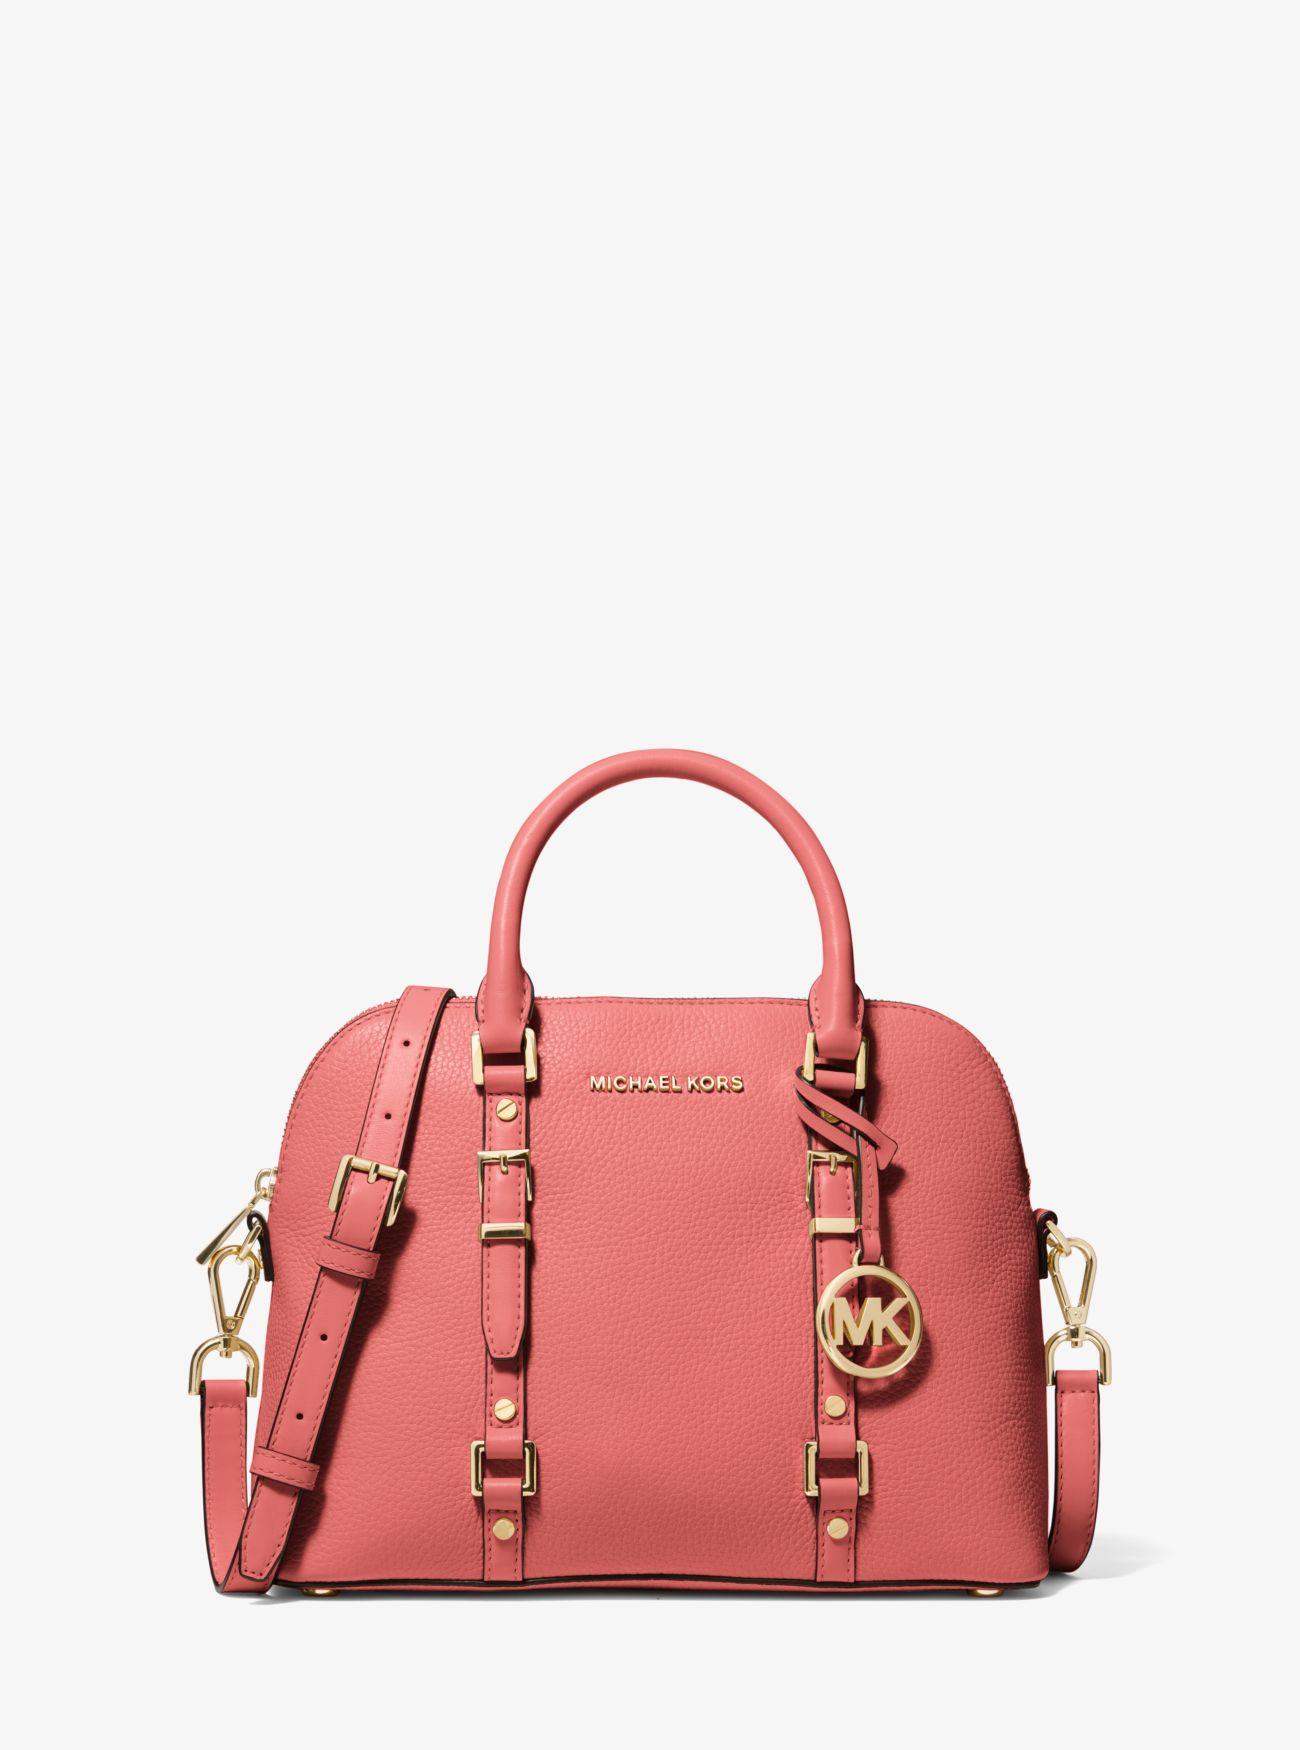 Michael Kors Bedford Legacy Medium Pebbled Leather Dome Satchel in Pink ...